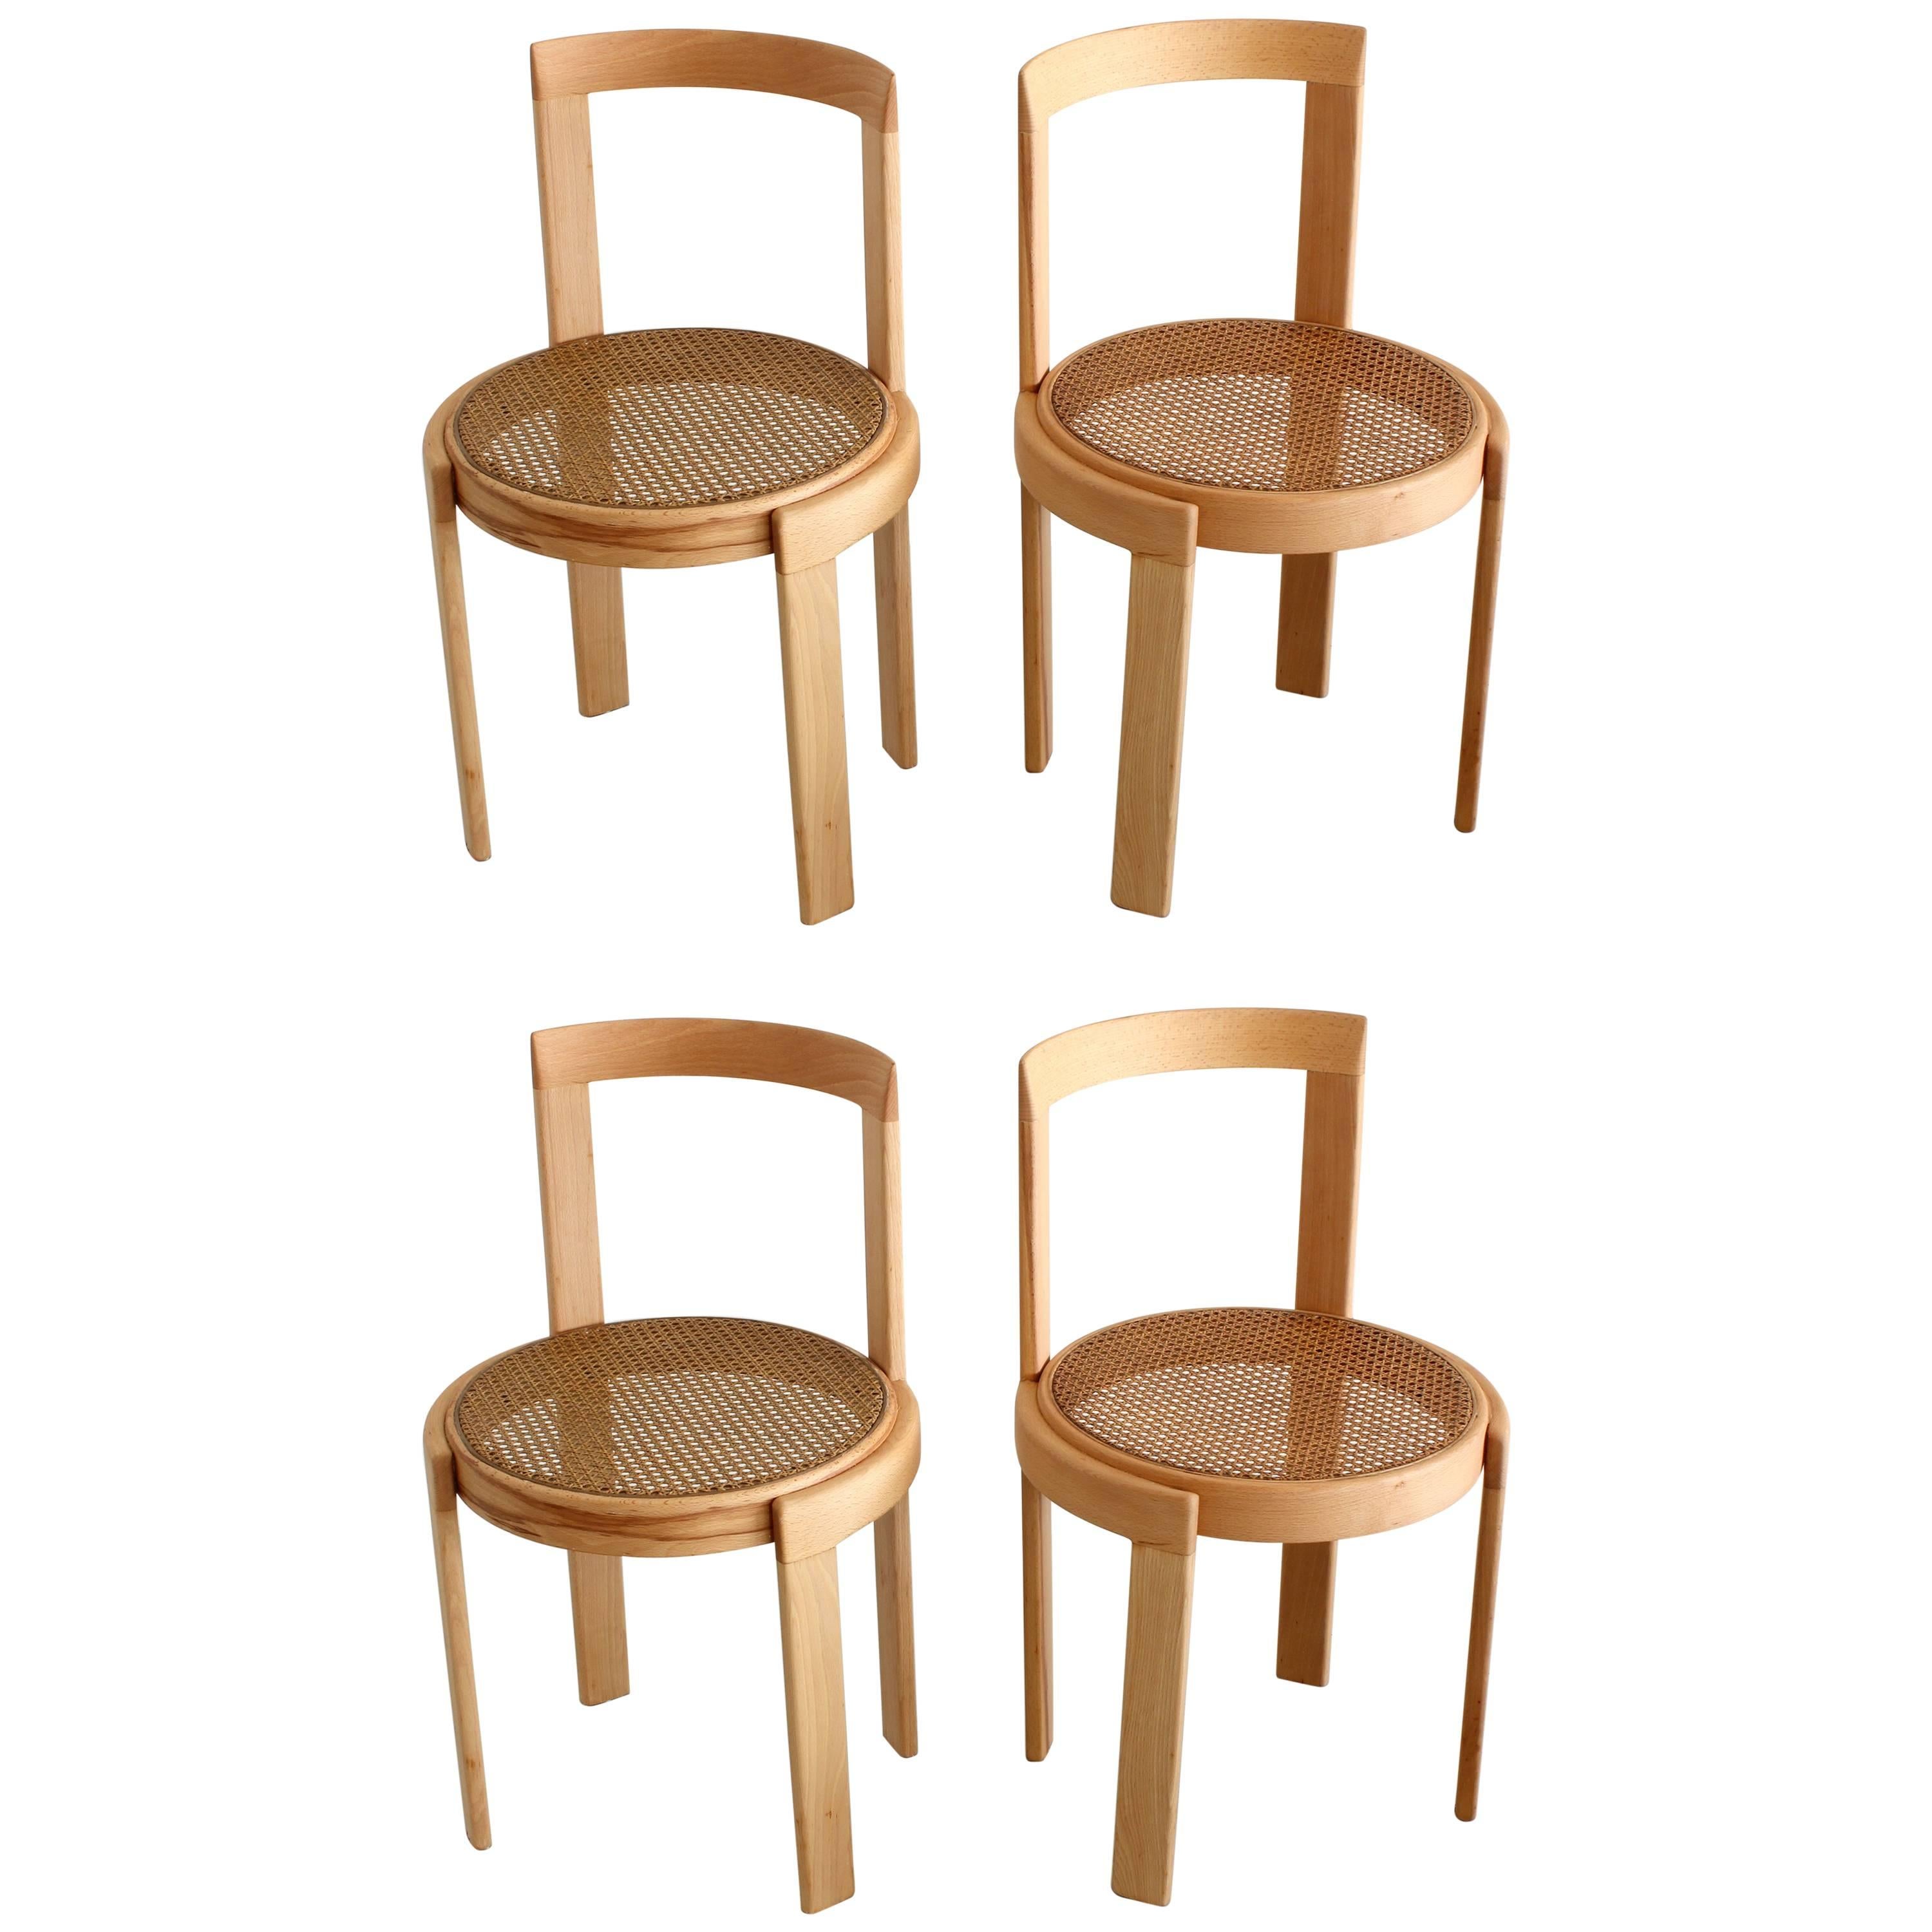 Italian Bentwood Cane Chairs in Natural Beech